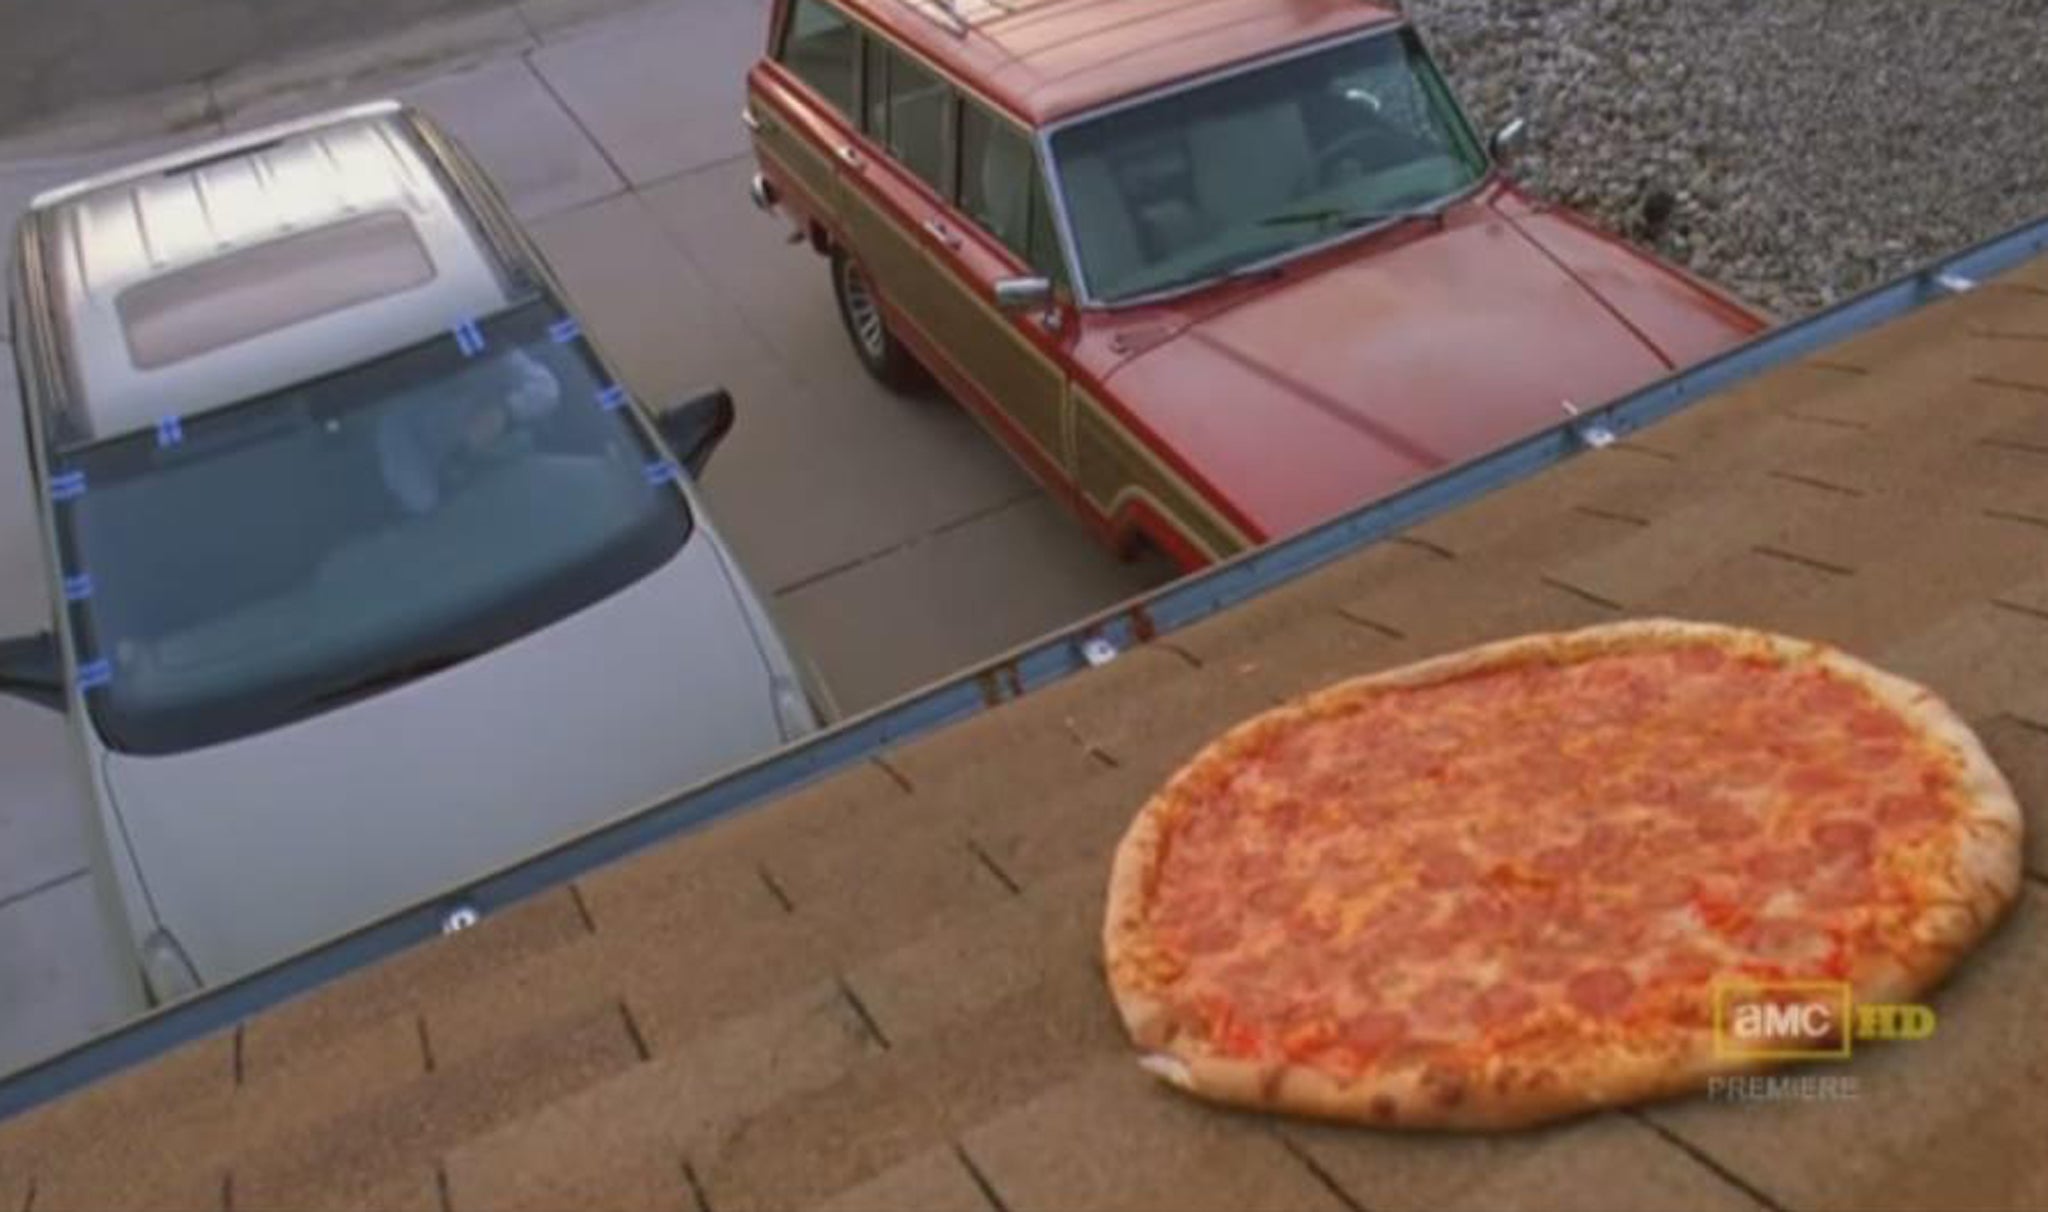 Walter White hurls a pizza onto the roof of his home in the memorable Breaking Bad scene